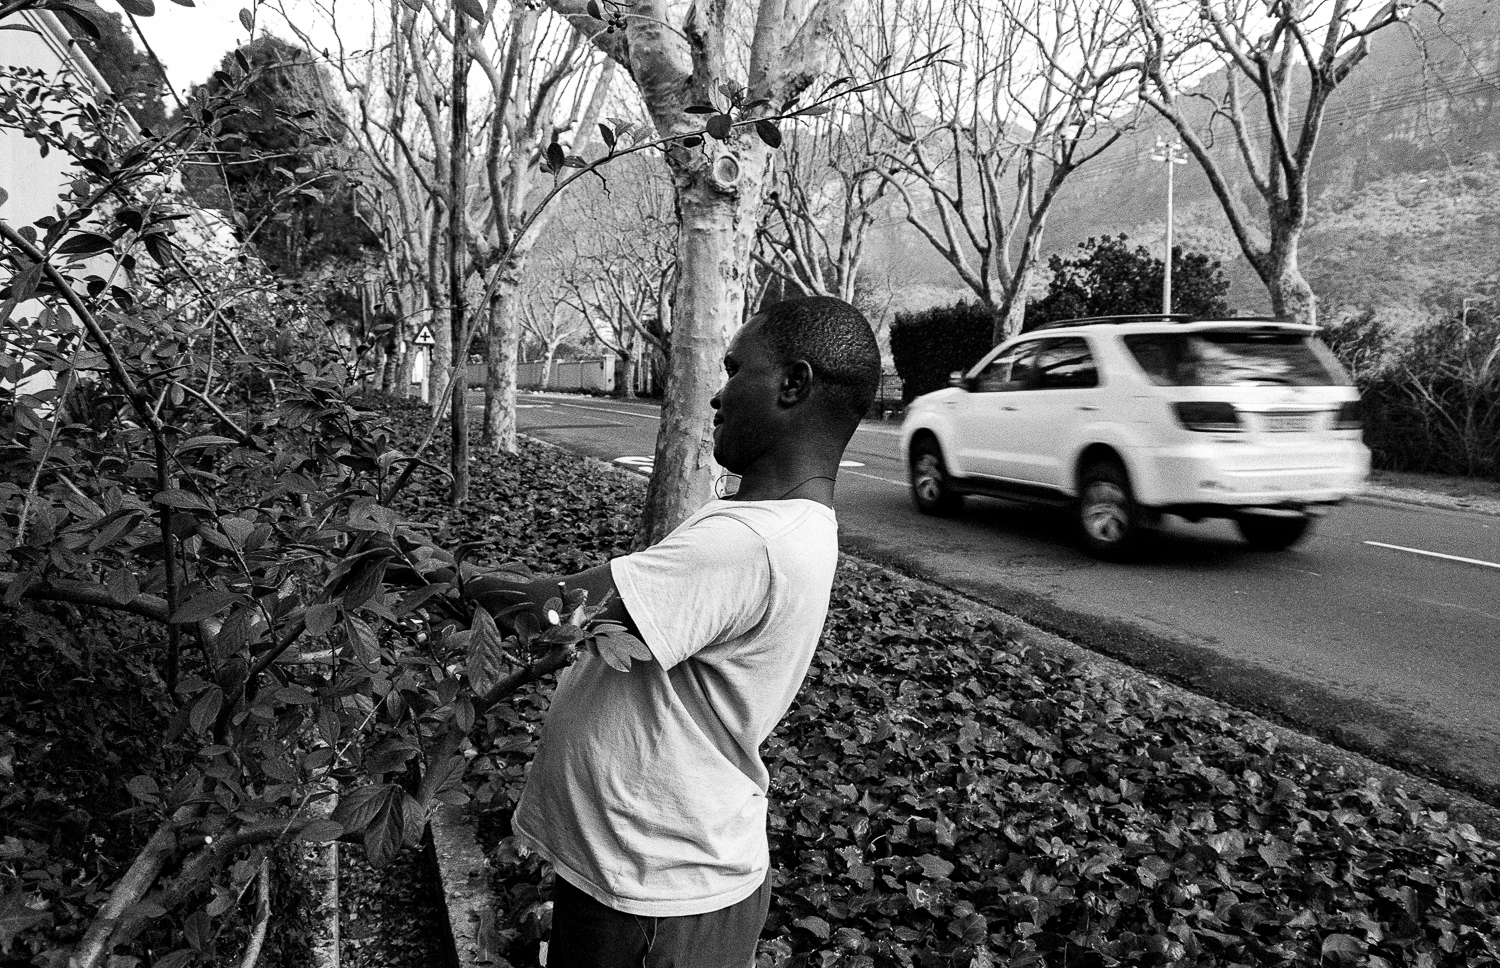 Domestic worker cutting hedges, Bishop’s Court, 2009.